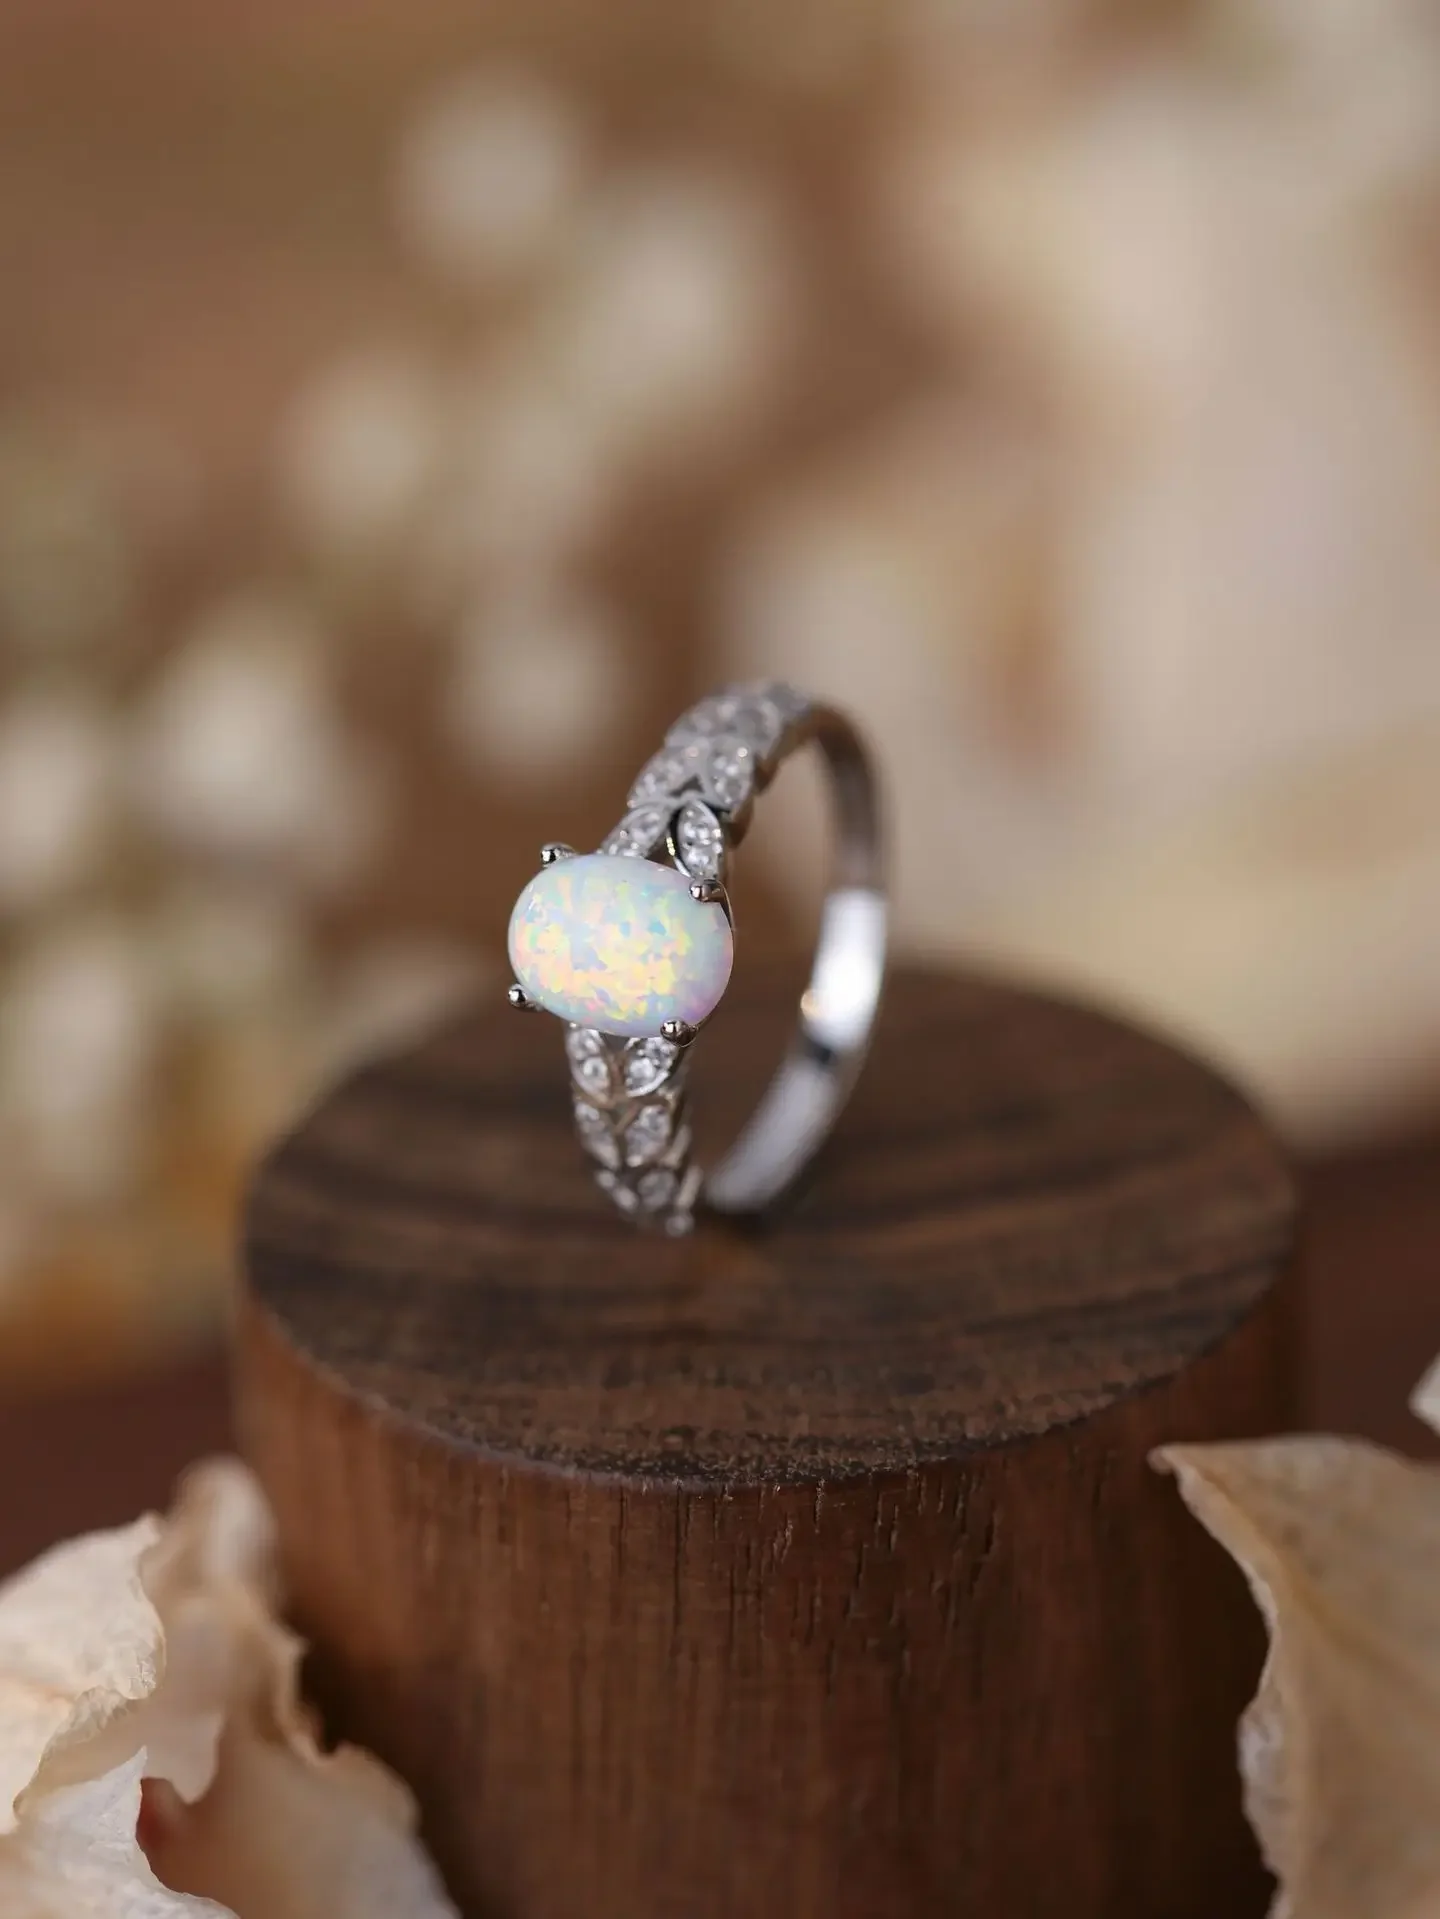 

Pure 925 Silver Hot Sales Oval White Opal Women's Ring Inlaid with 2 Row of Symmetrical Zircon,Sweet Style for Wedding